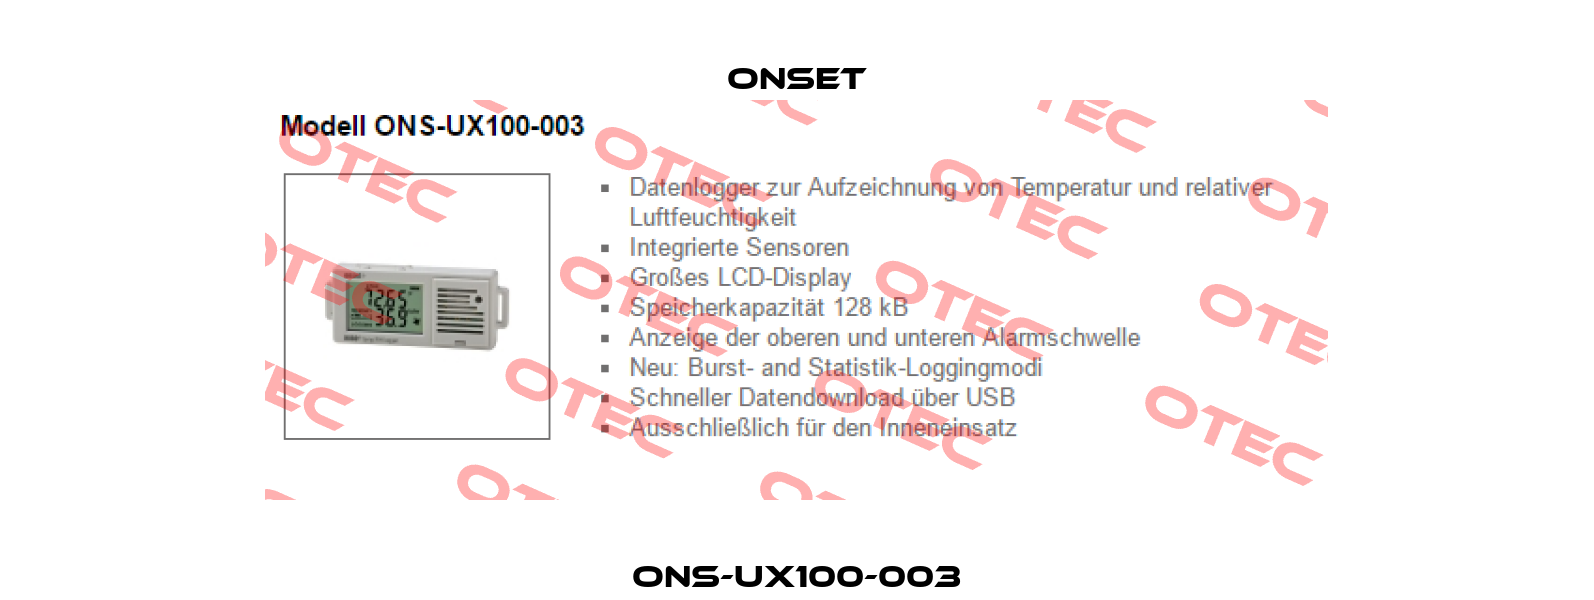 ONS-UX100-003 Onset